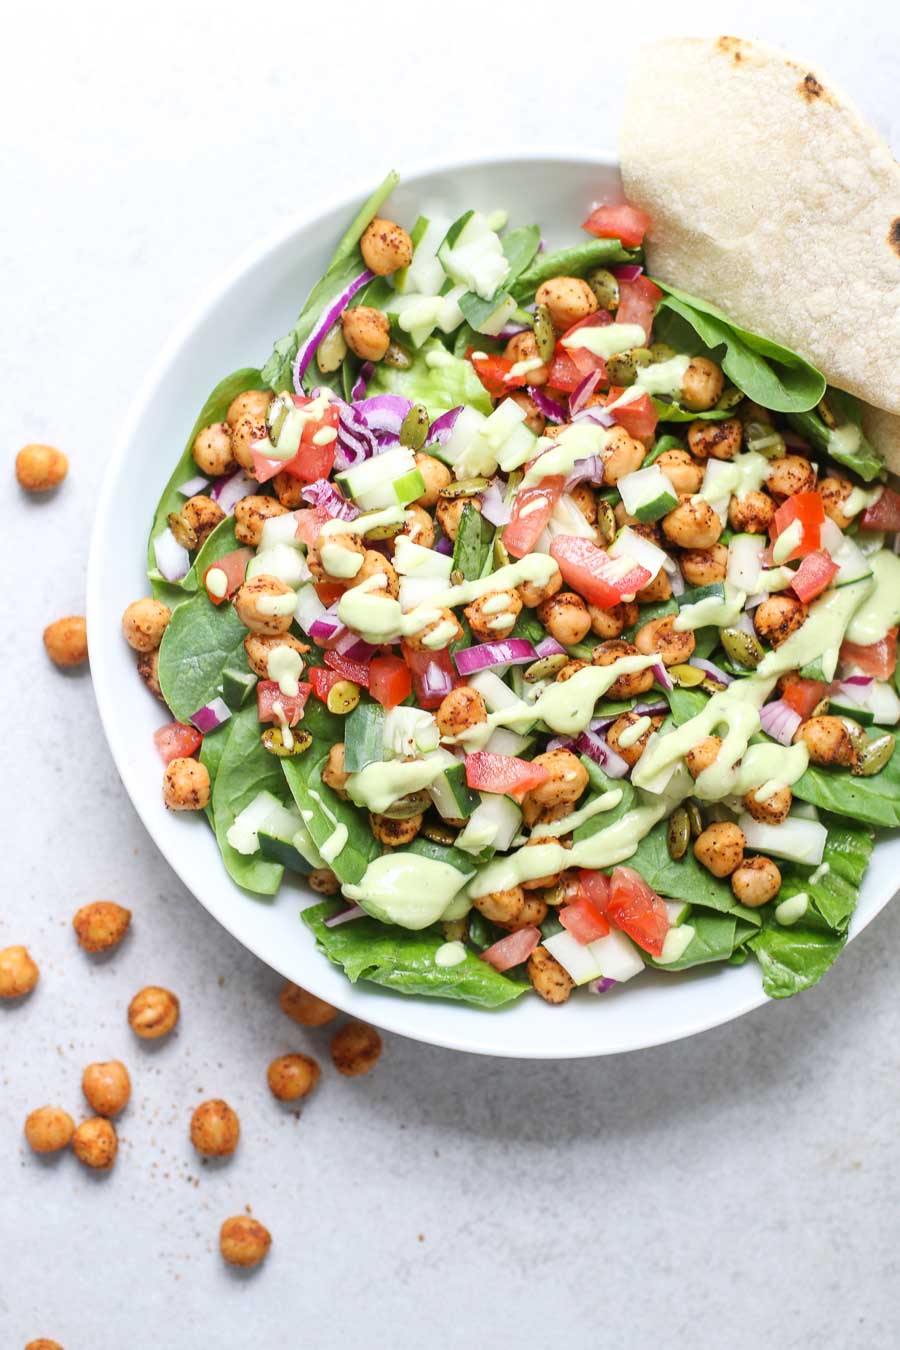 Chipotle Chickpea Taco Salad with tortilla overhead